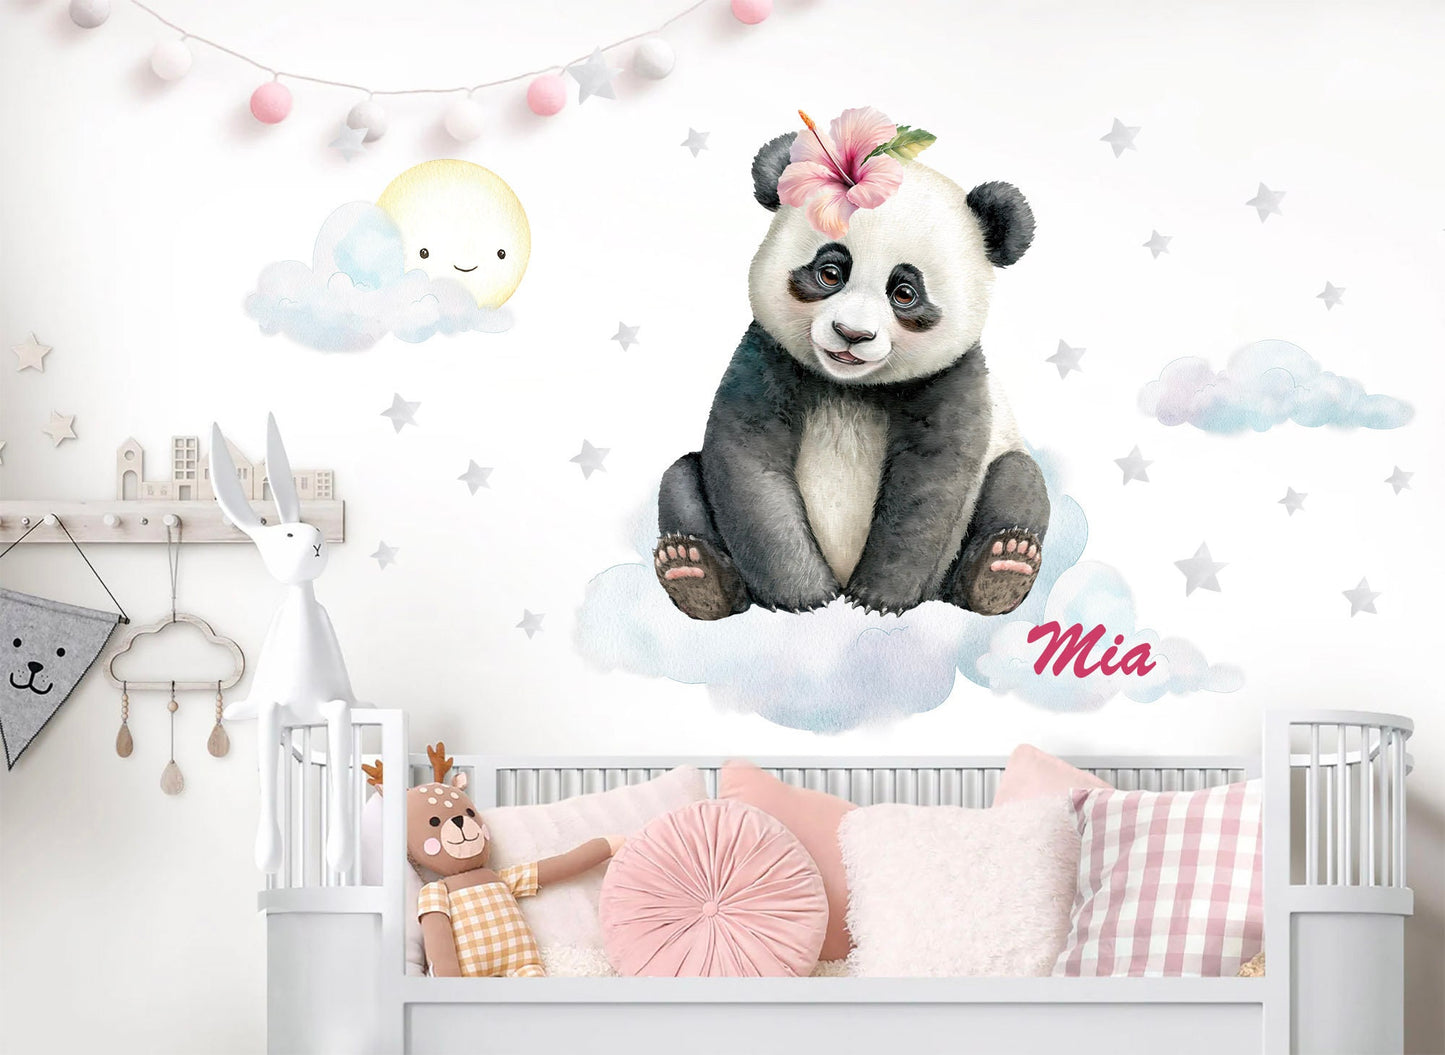 Customizable Name Panda Baby Wall Decal - Panda with Flower Crown Sitting on Clouds - BR359